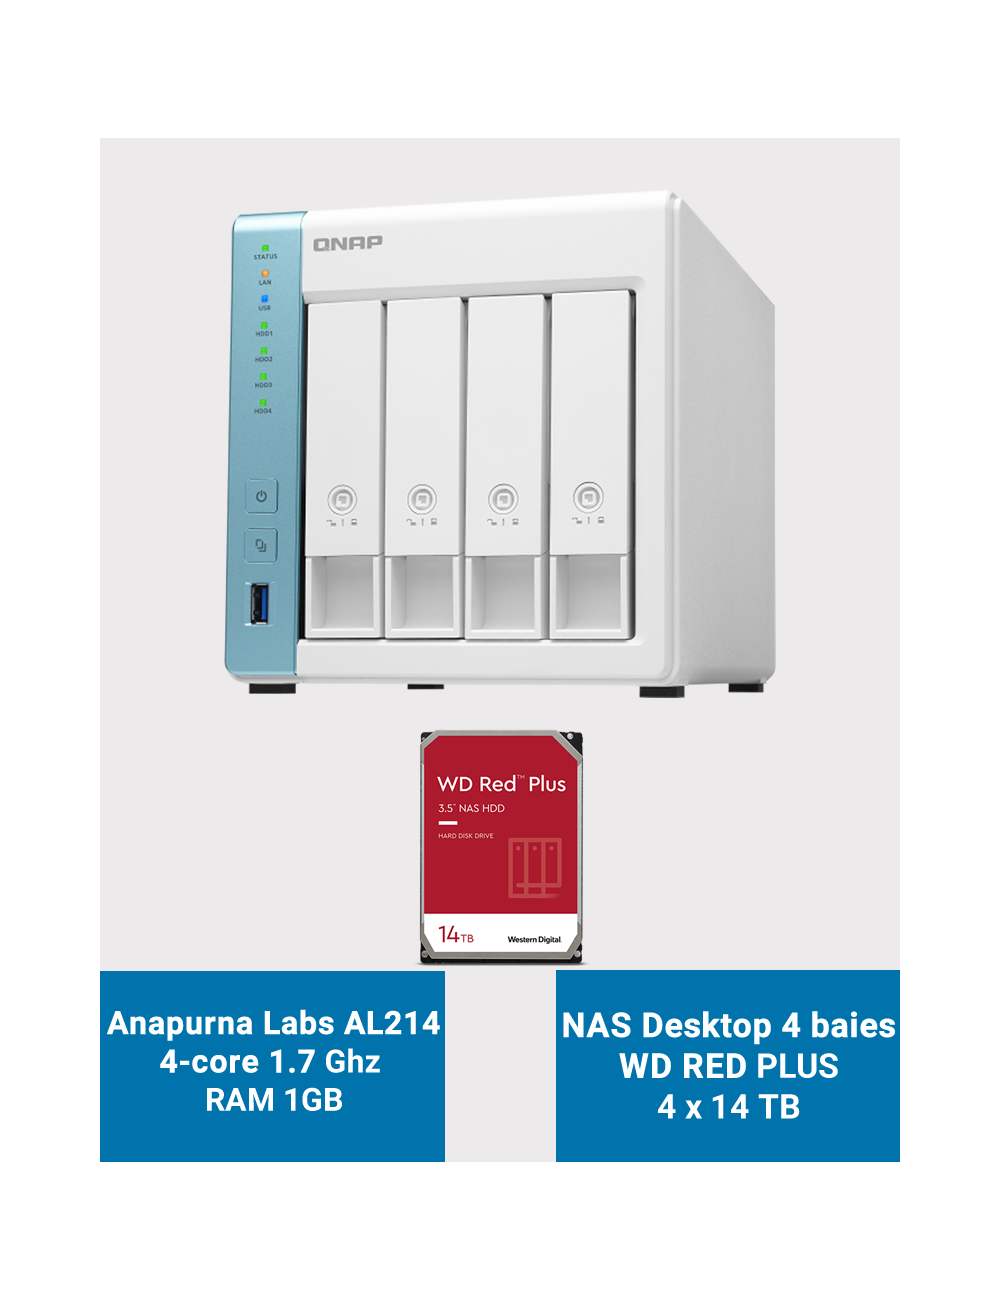 Qnap TS-431K Serveur NAS 4 baies WD RED PLUS 56To (4x14To)